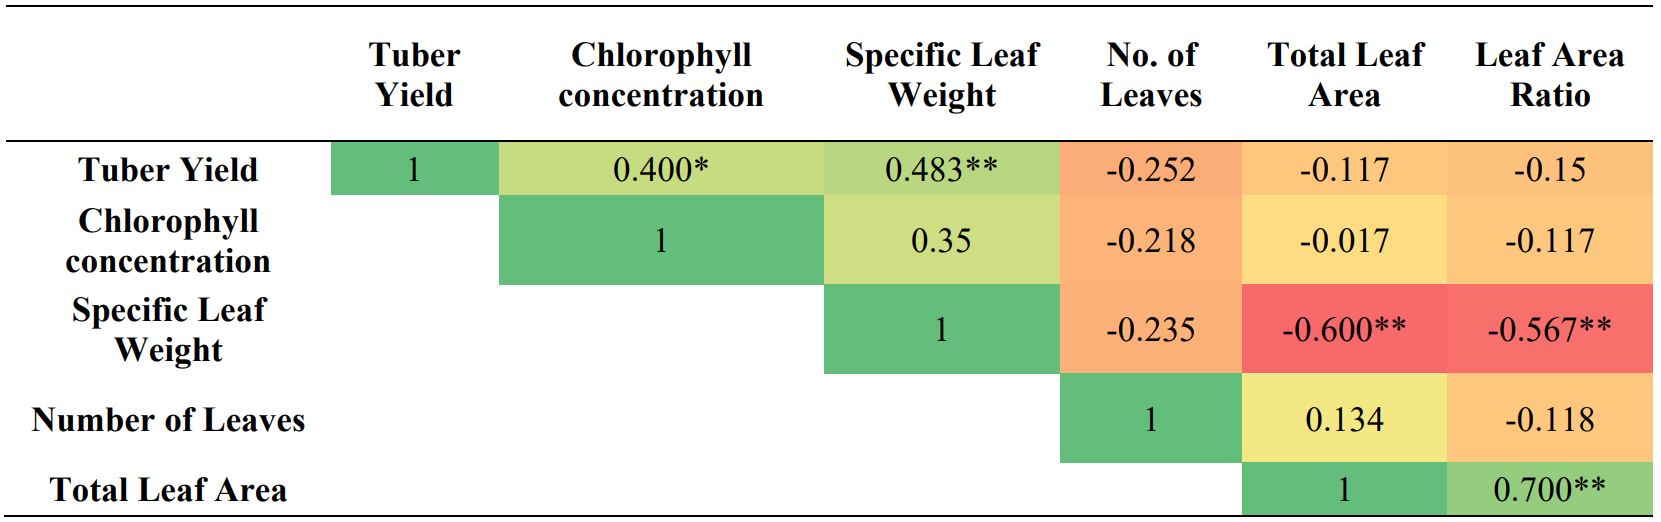 Correlations analysis of chlorophyll concentration with potato tuber analysis